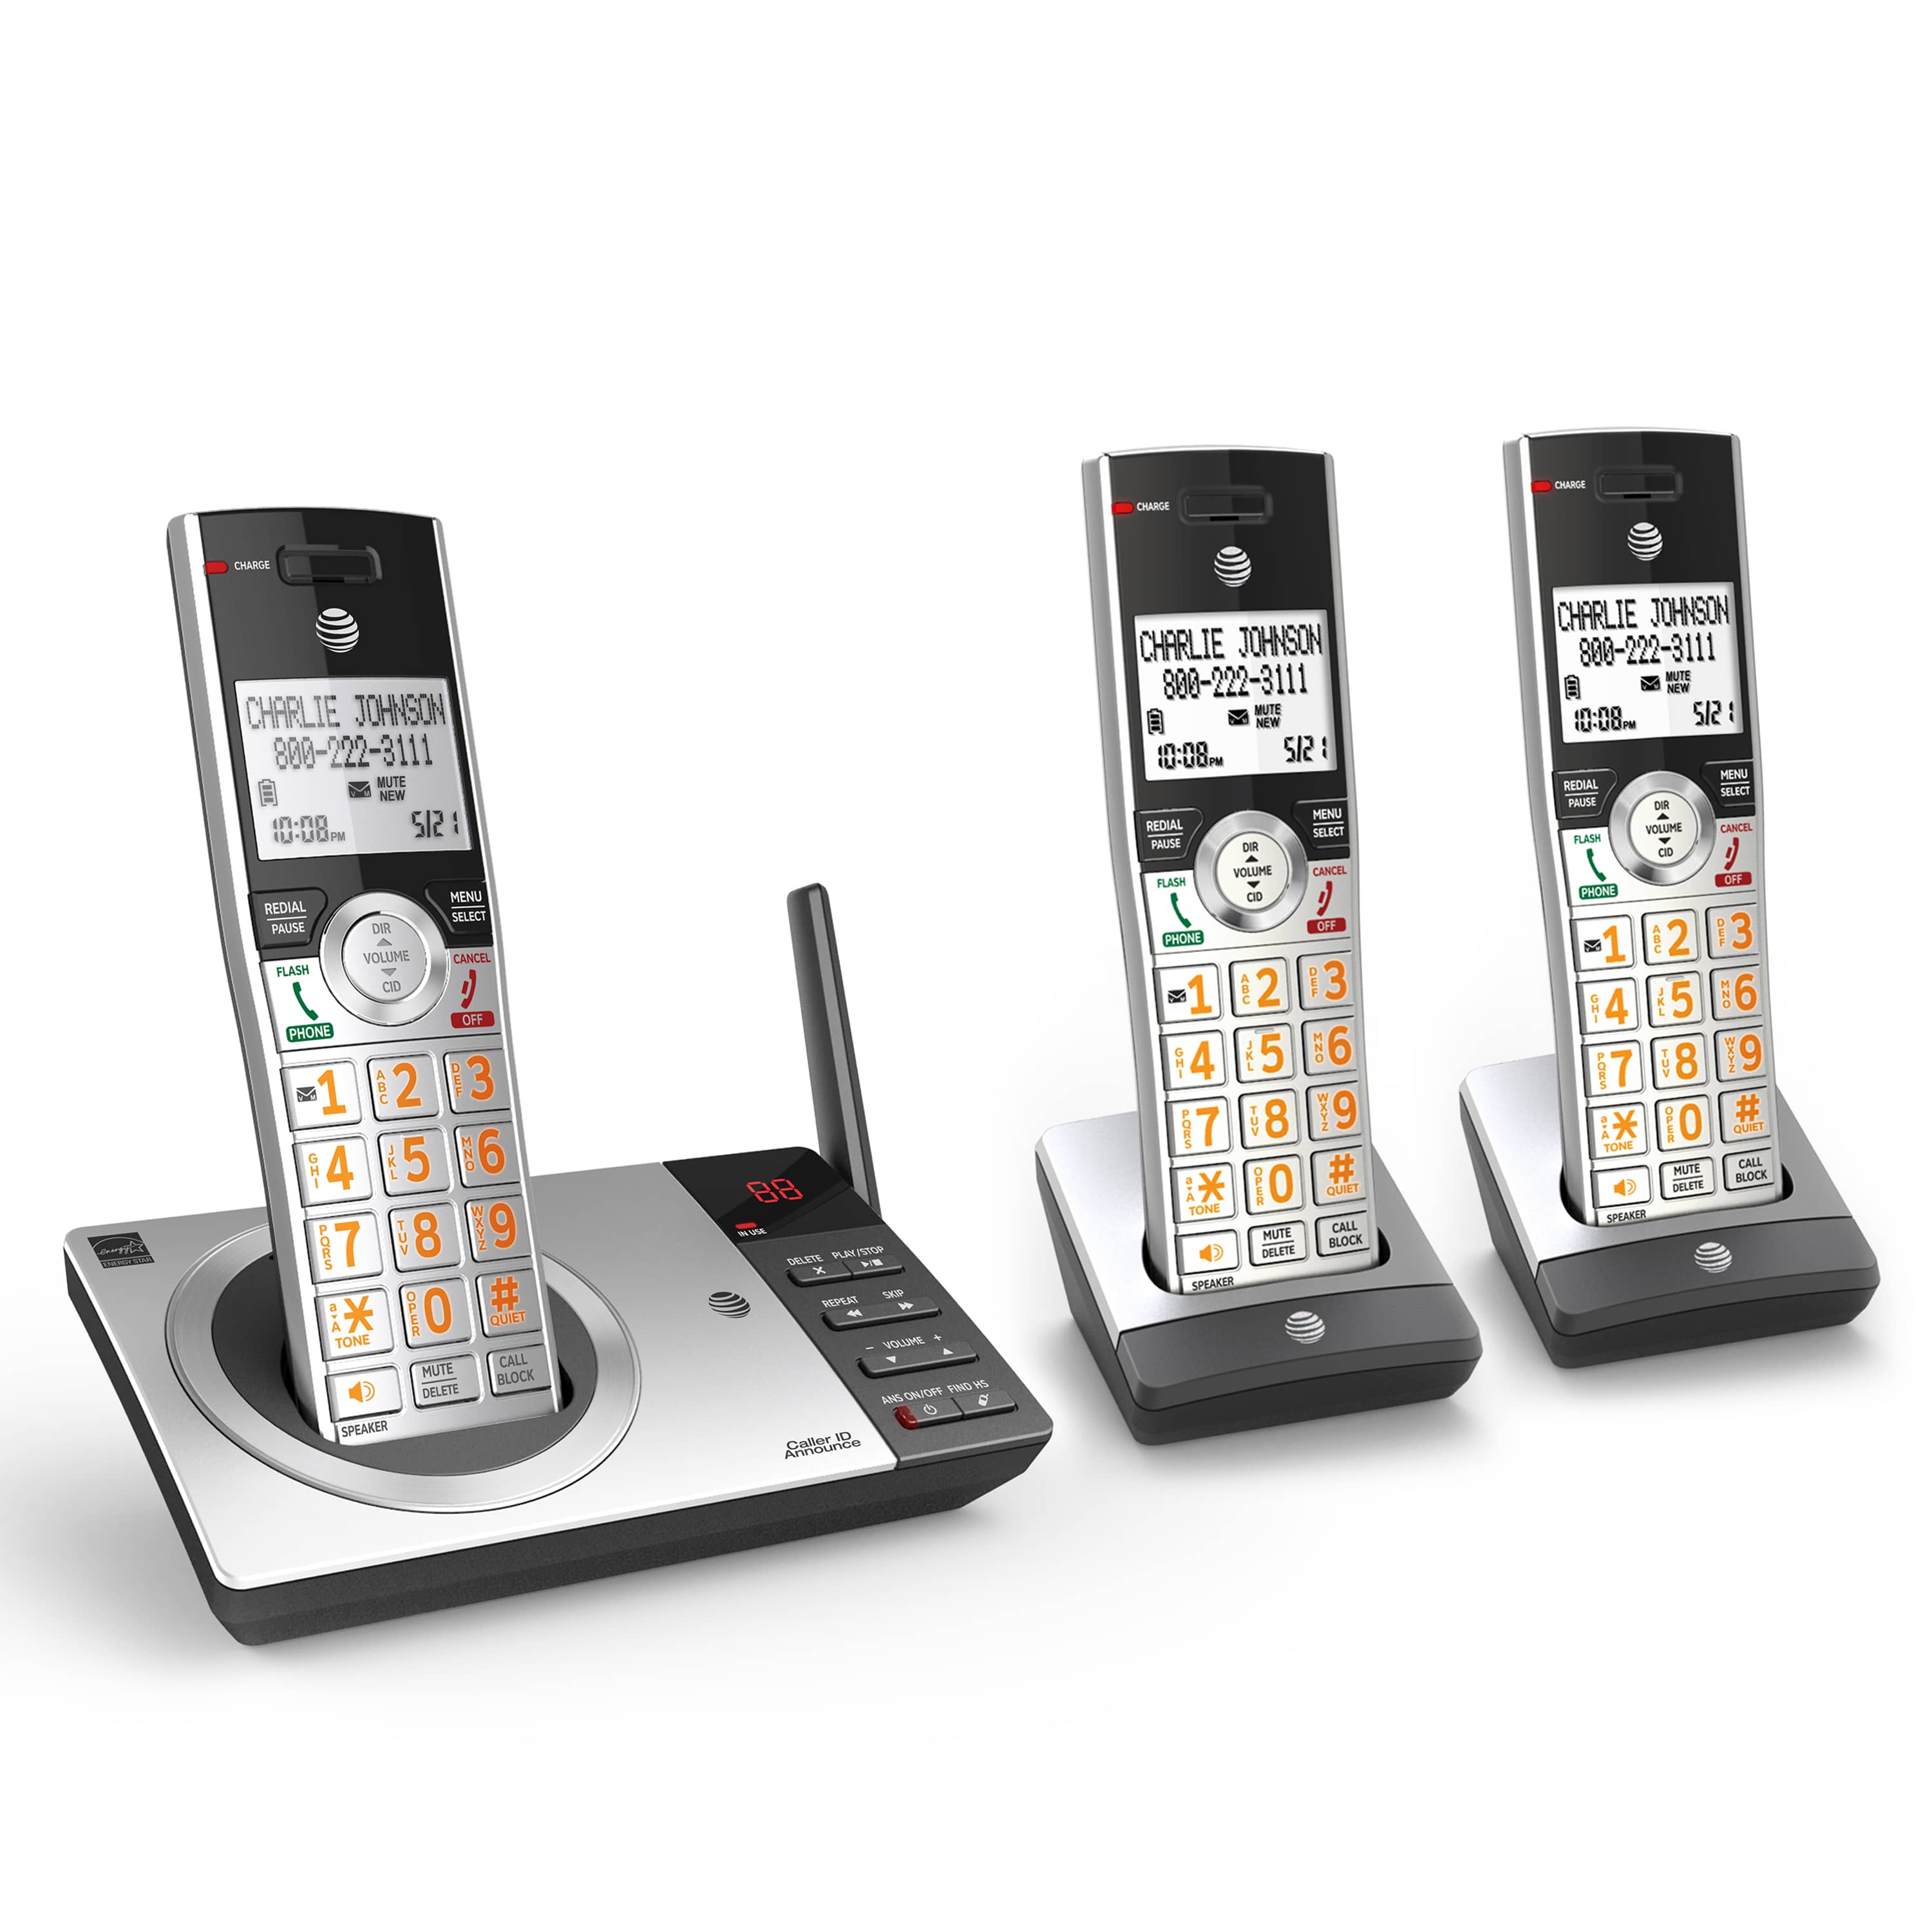 6 handset phone system with smart call blocker - view 3